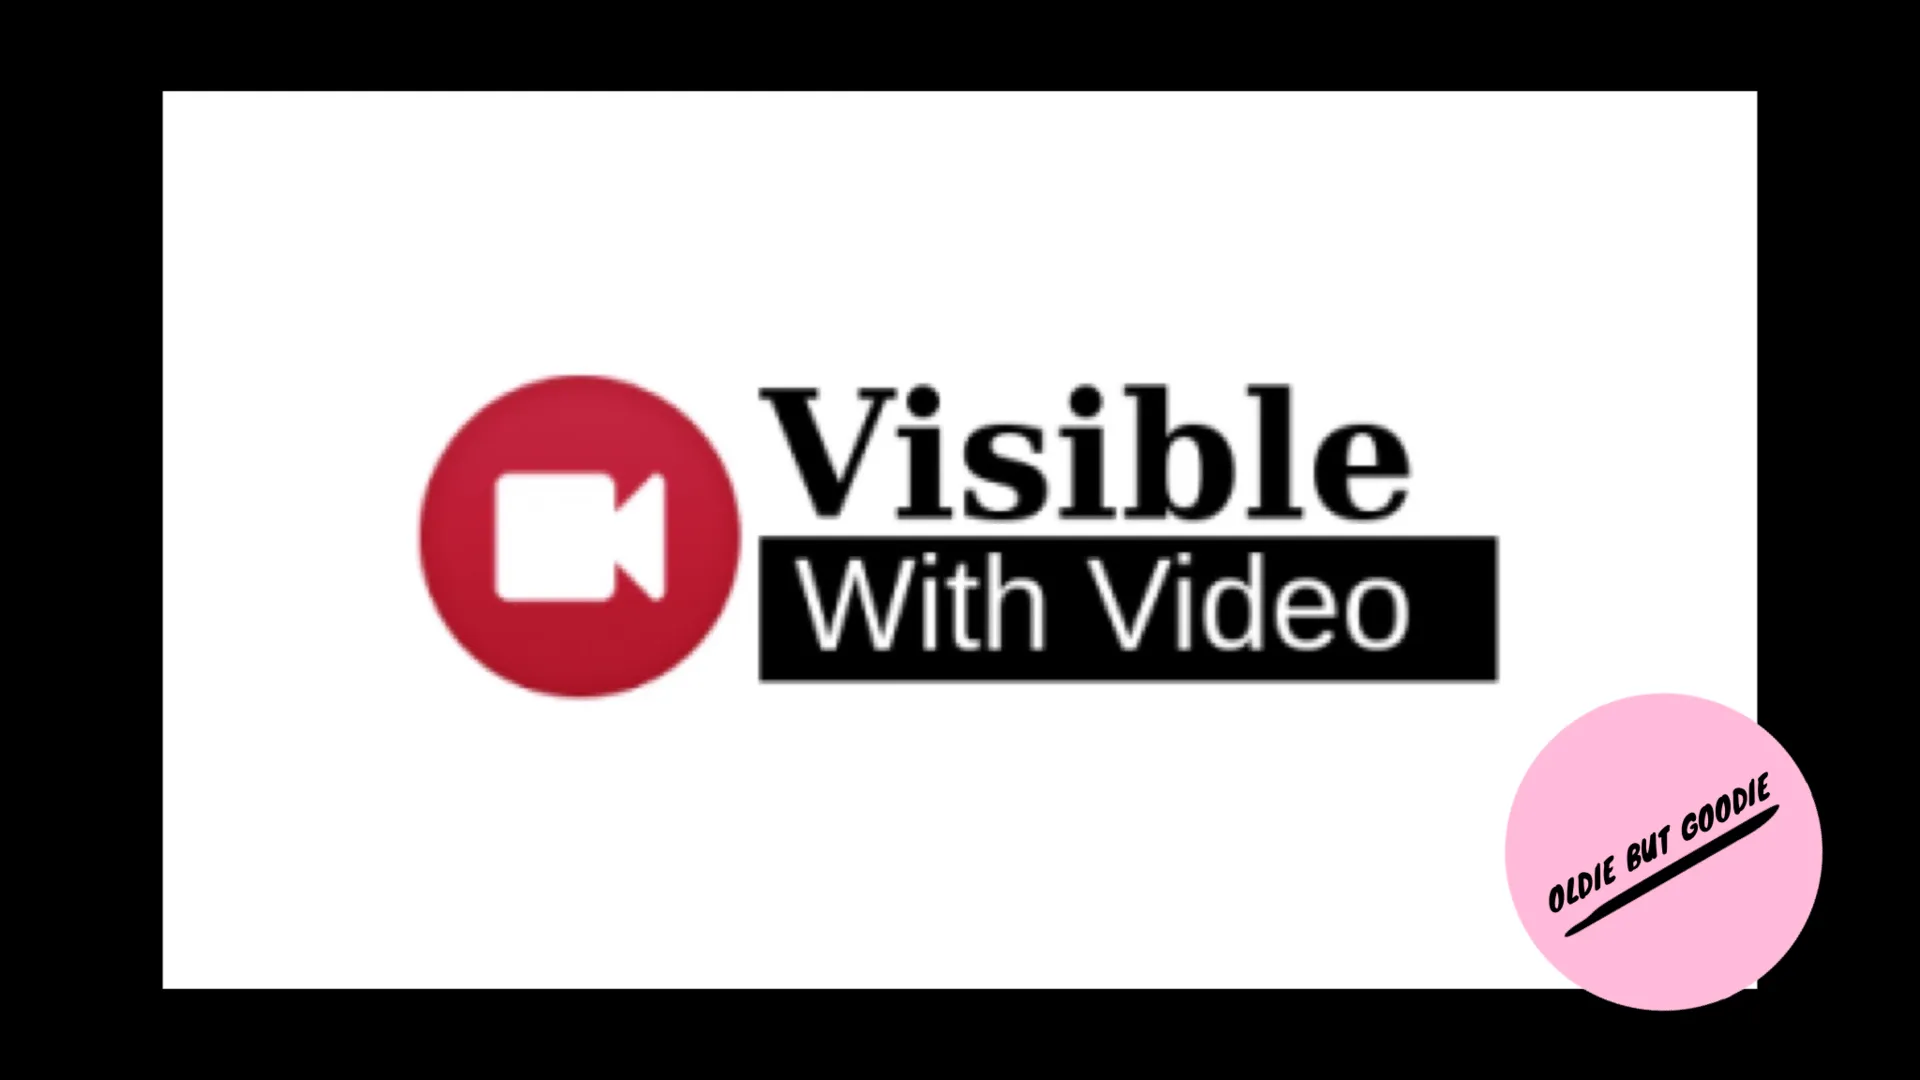 Visible With Video